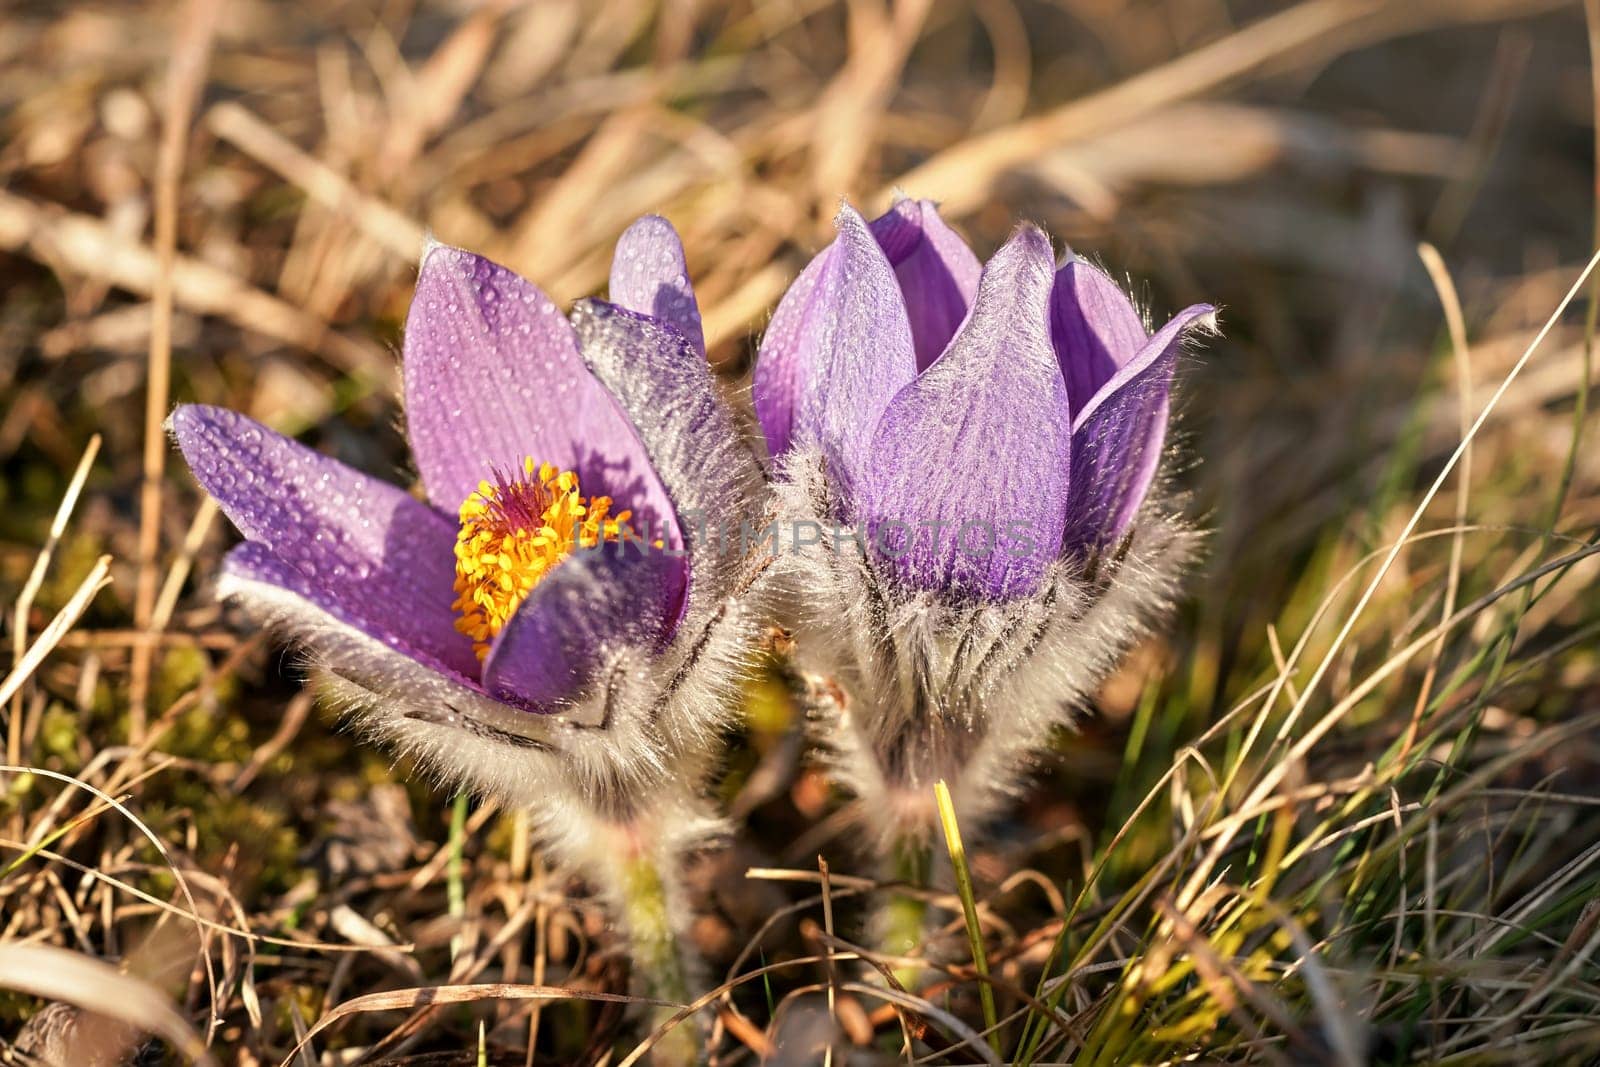 Purple greater pasque flower - Pulsatilla grandis - growing in dry grass, sun shines on water drops and lilac coloured petals